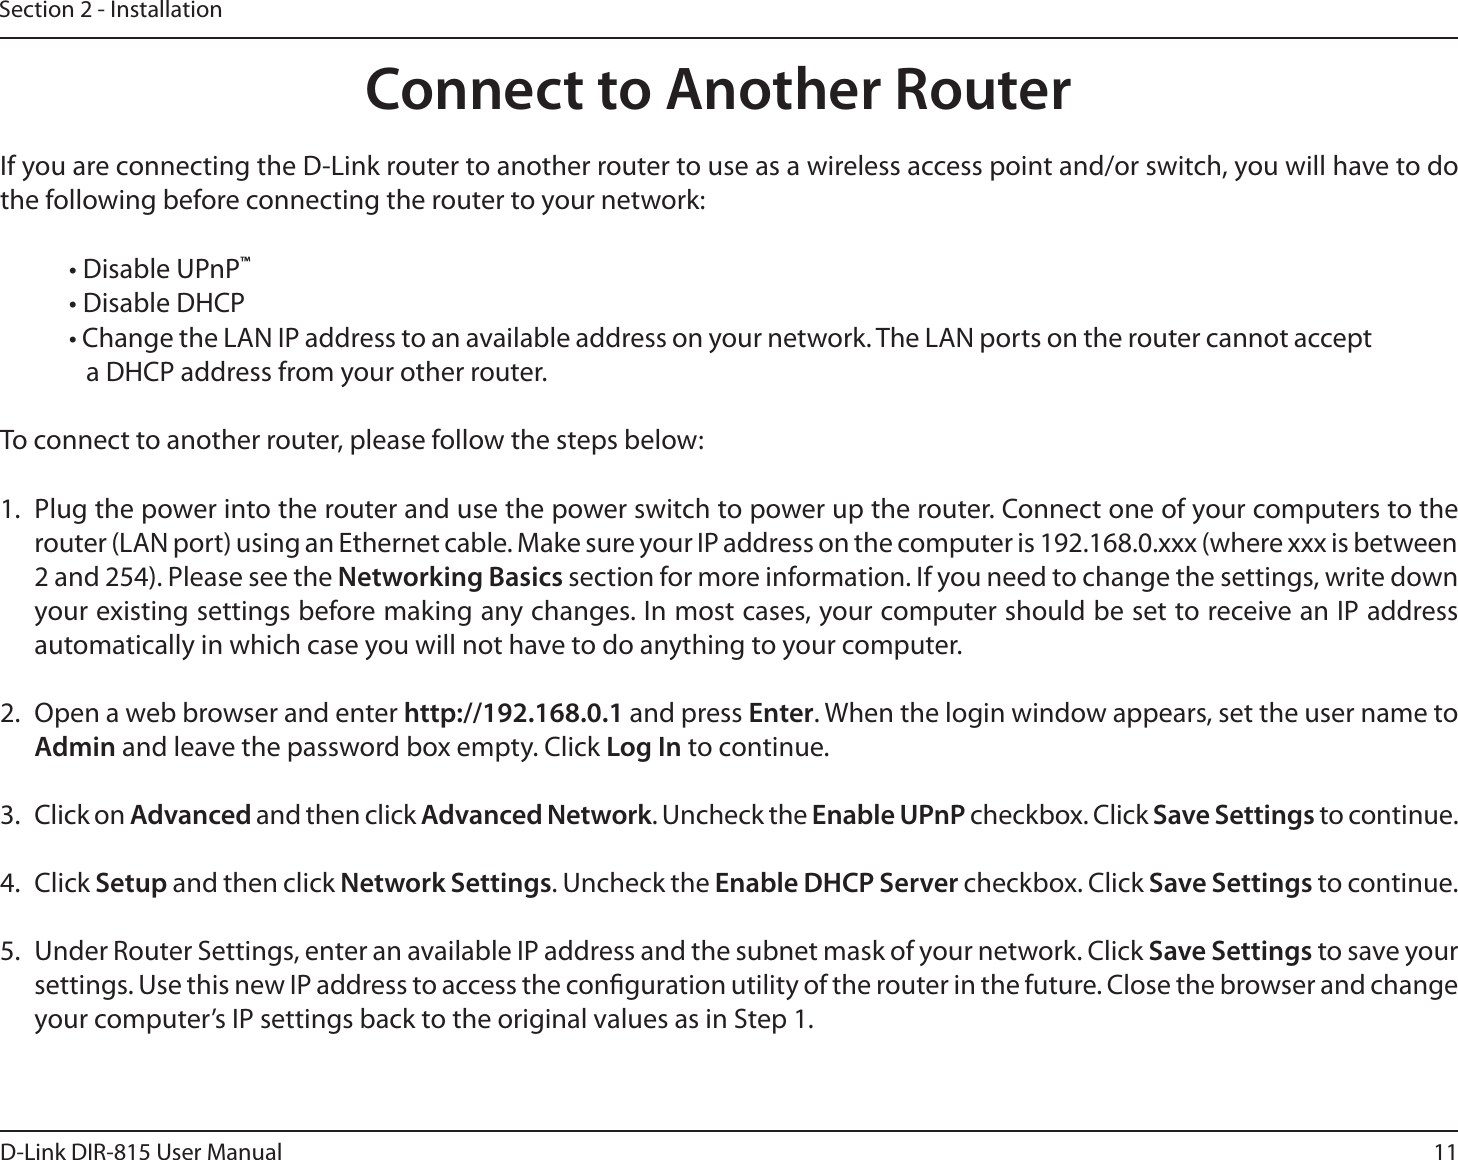 11D-Link DIR-815 User ManualSection 2 - InstallationIf you are connecting the D-Link router to another router to use as a wireless access point and/or switch, you will have to do the following before connecting the router to your network:t%JTBCMF61O1™t%JTBCMF%)$1t$IBOHFUIF-&quot;/*1BEESFTTUPBOBWBJMBCMFBEESFTTPOZPVSOFUXPSL5IF-&quot;/QPSUTPOUIFSPVUFSDBOOPUBDDFQUa DHCP address from your other router.To connect to another router, please follow the steps below:1.  Plug the power into the router and use the power switch to power up the router. Connect one of your computers to the router (LAN port) using an Ethernet cable. Make sure your IP address on the computer is 192.168.0.xxx (where xxx is between 2 and 254). Please see the Networking Basics section for more information. If you need to change the settings, write down your existing settings before making any changes. In most cases, your computer should be set to receive an IP address automatically in which case you will not have to do anything to your computer.2.  Open a web browser and enter IUUQ and press Enter. When the login window appears, set the user name to Admin and leave the password box empty. Click Log In to continue.3. Click on Advanced and then click Advanced Network. Uncheck the Enable UPnP checkbox. Click Save Settings to continue. 4. Click Setup and then click Network Settings. Uncheck the Enable DHCP Server checkbox. Click Save Settings to continue.5.  Under Router Settings, enter an available IP address and the subnet mask of your network. Click Save Settings to save your settings. Use this new IP address to access the conguration utility of the router in the future. Close the browser and change your computer’s IP settings back to the original values as in Step 1.Connect to Another Router